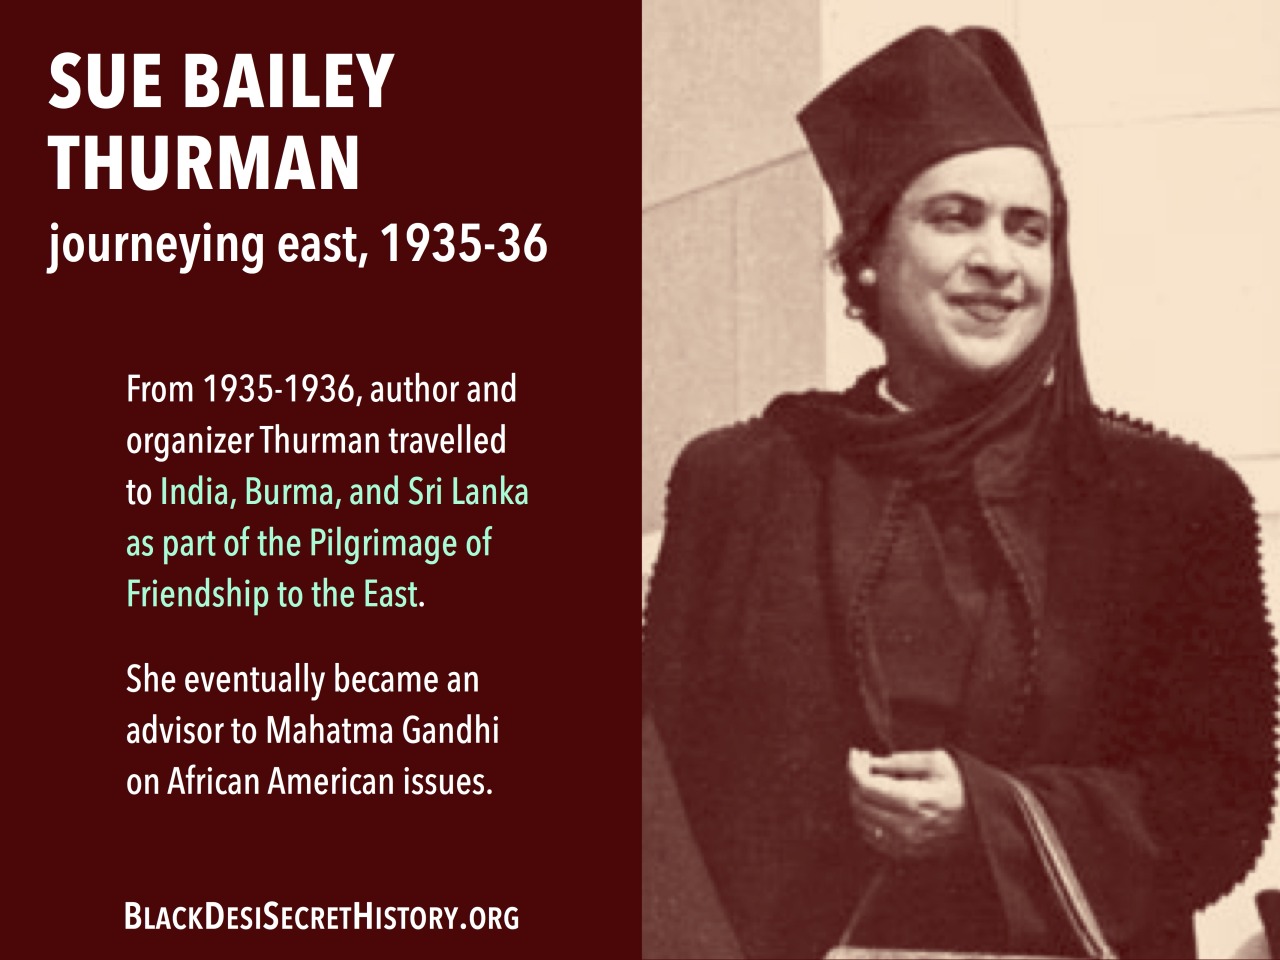 SUE BAILEY THURMAN, journeying east, 1935-36: From 1935-1936, author and organizer Thurman travelled to India, Burma, and Sri Lanka as part of the Pilgrimage of Friendship to the East. She eventually became an advisor to Mahatma Gandhi on African American issues.